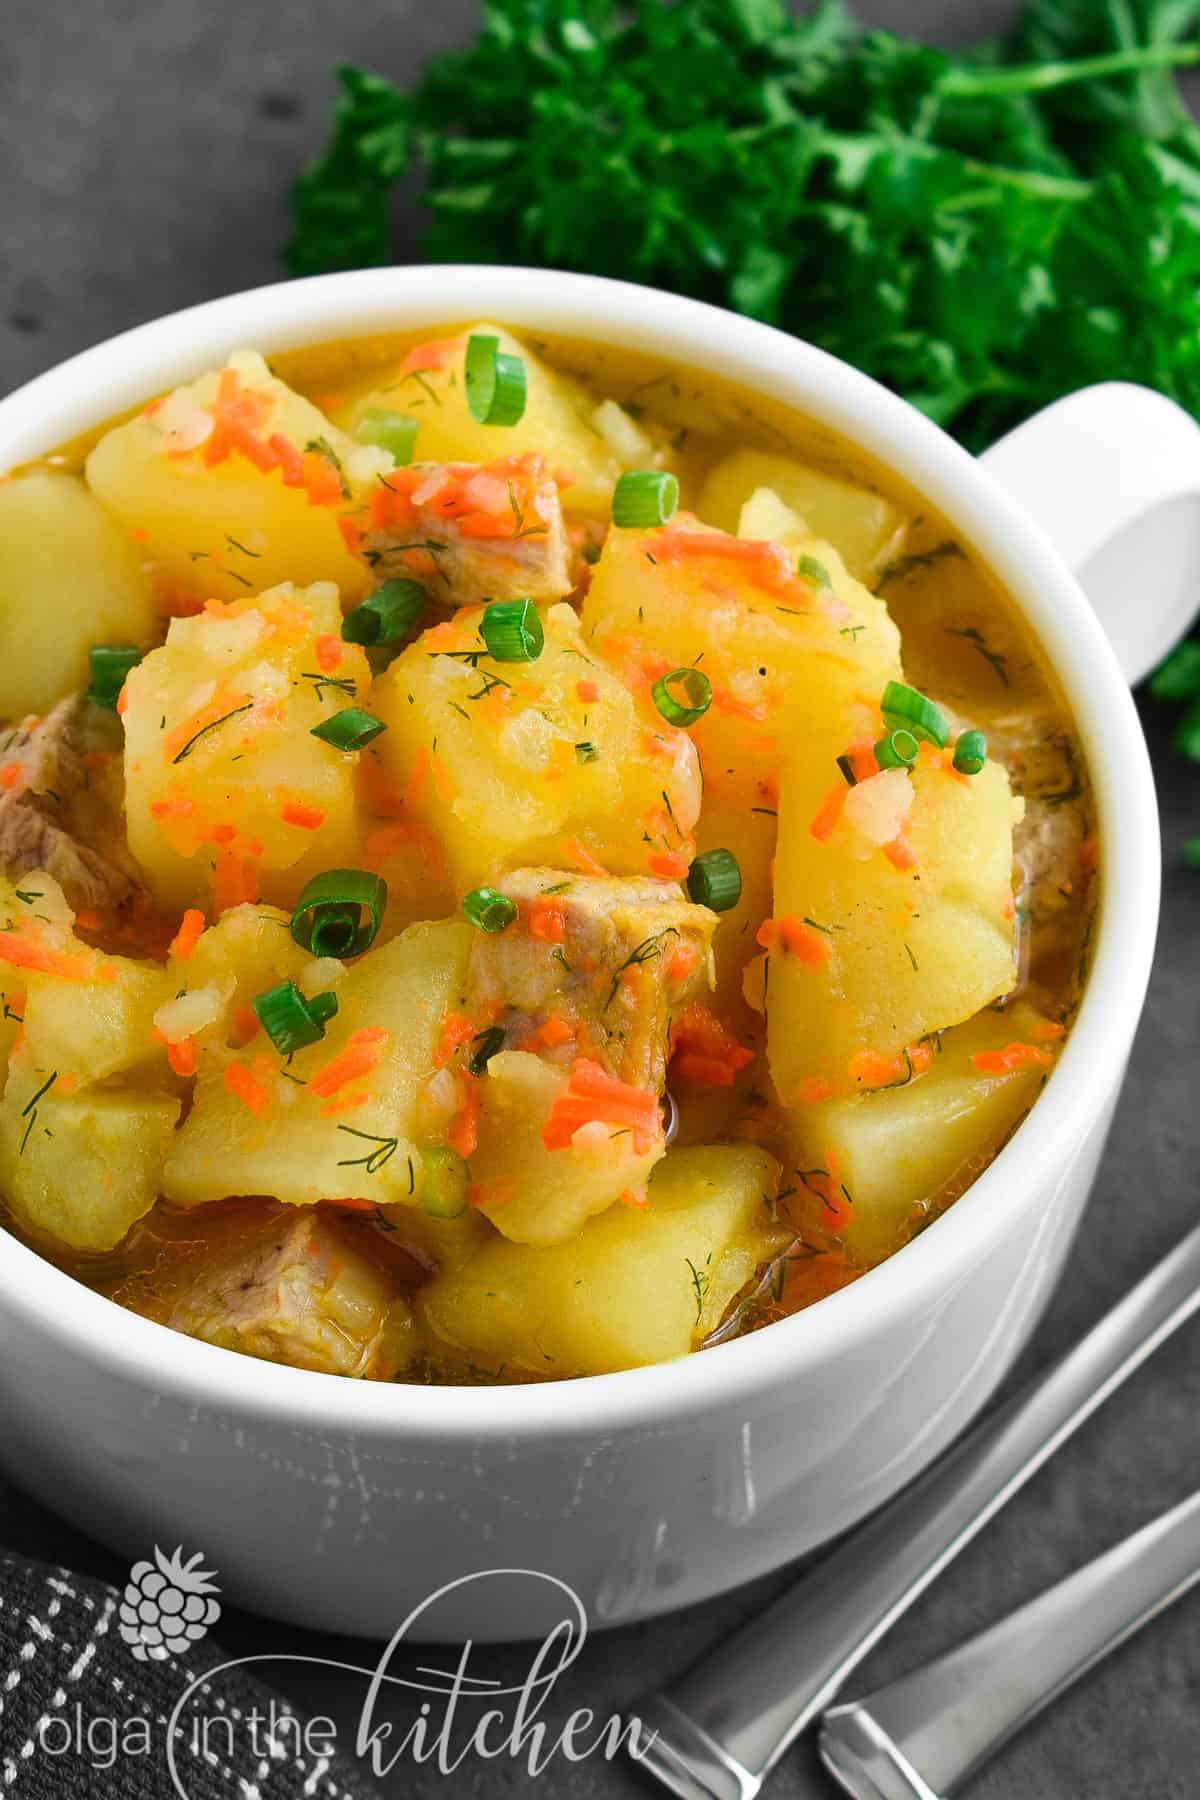 Braised Potatoes with Pork: chunks of potatoes and tender-juicy meat coated in sauce that is created from carrots, onions and potato starch.| olgainthekitchen.com #olgainthekitchen #braisedpotatoes #potatoes #dinner #maincourse #pork #onepot #holiday